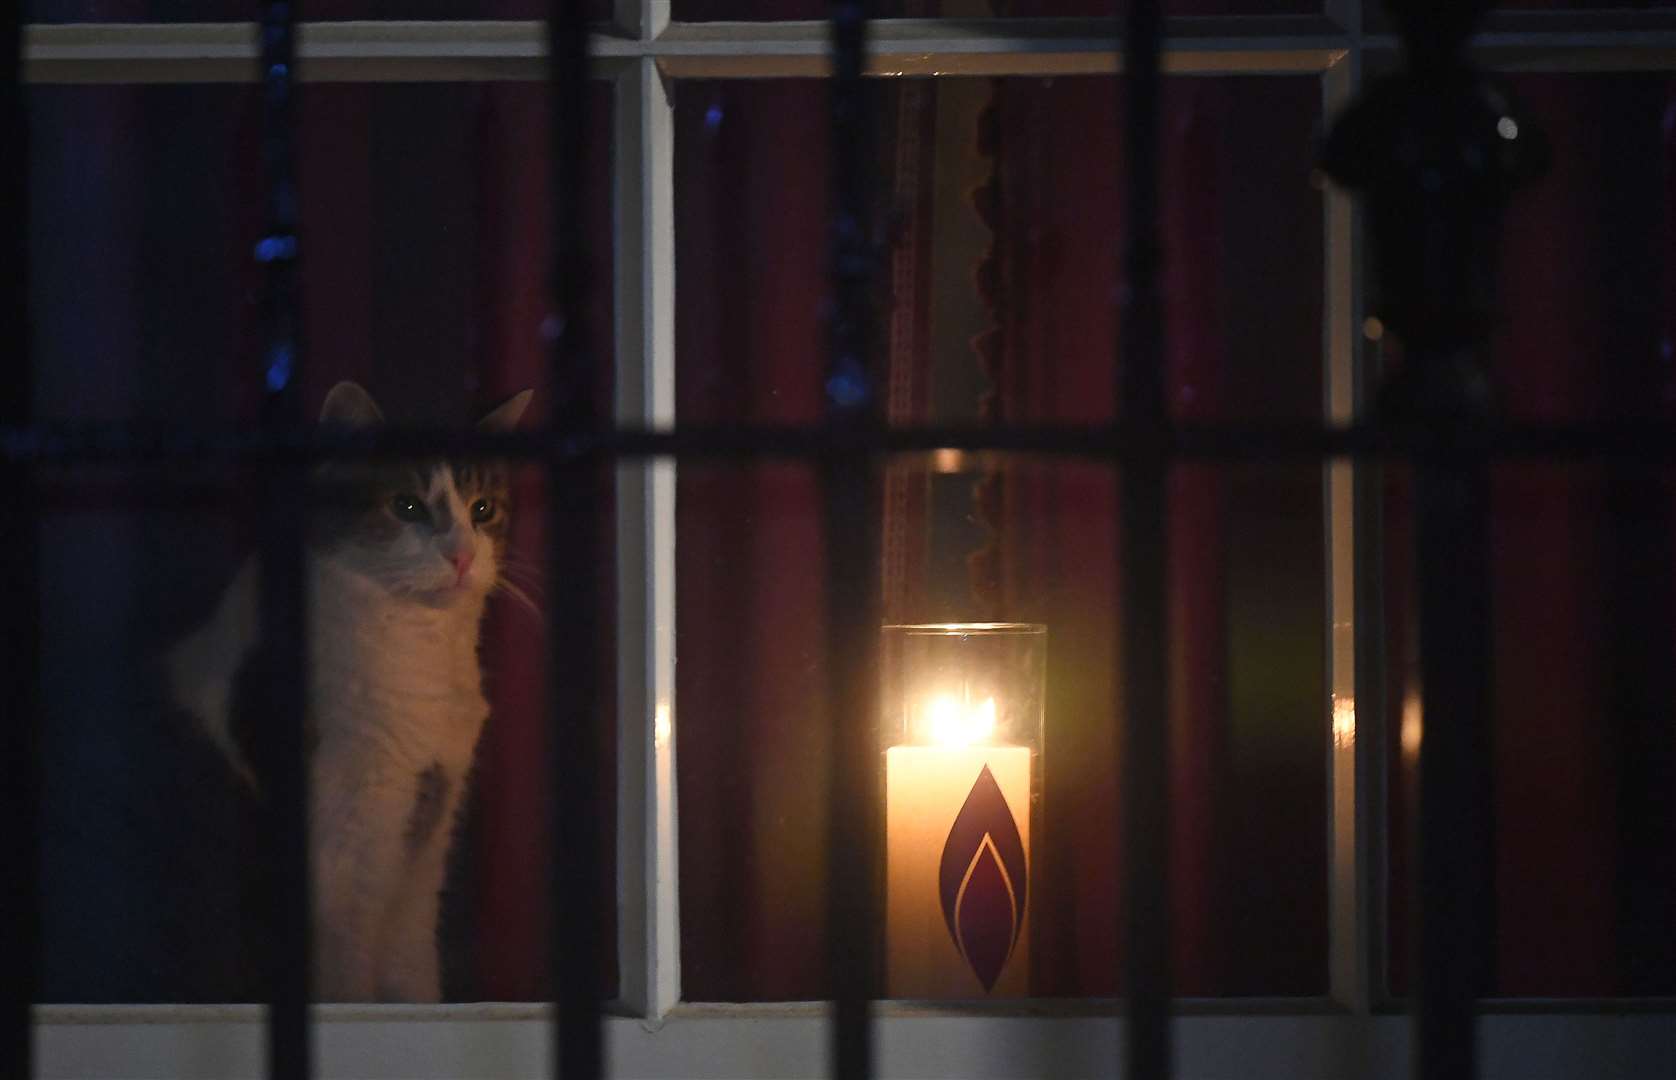 Larry the Cat sits next to a candle in a window at 10 Downing Street to mark Holocaust Memorial Day (Victoria Jones/PA)